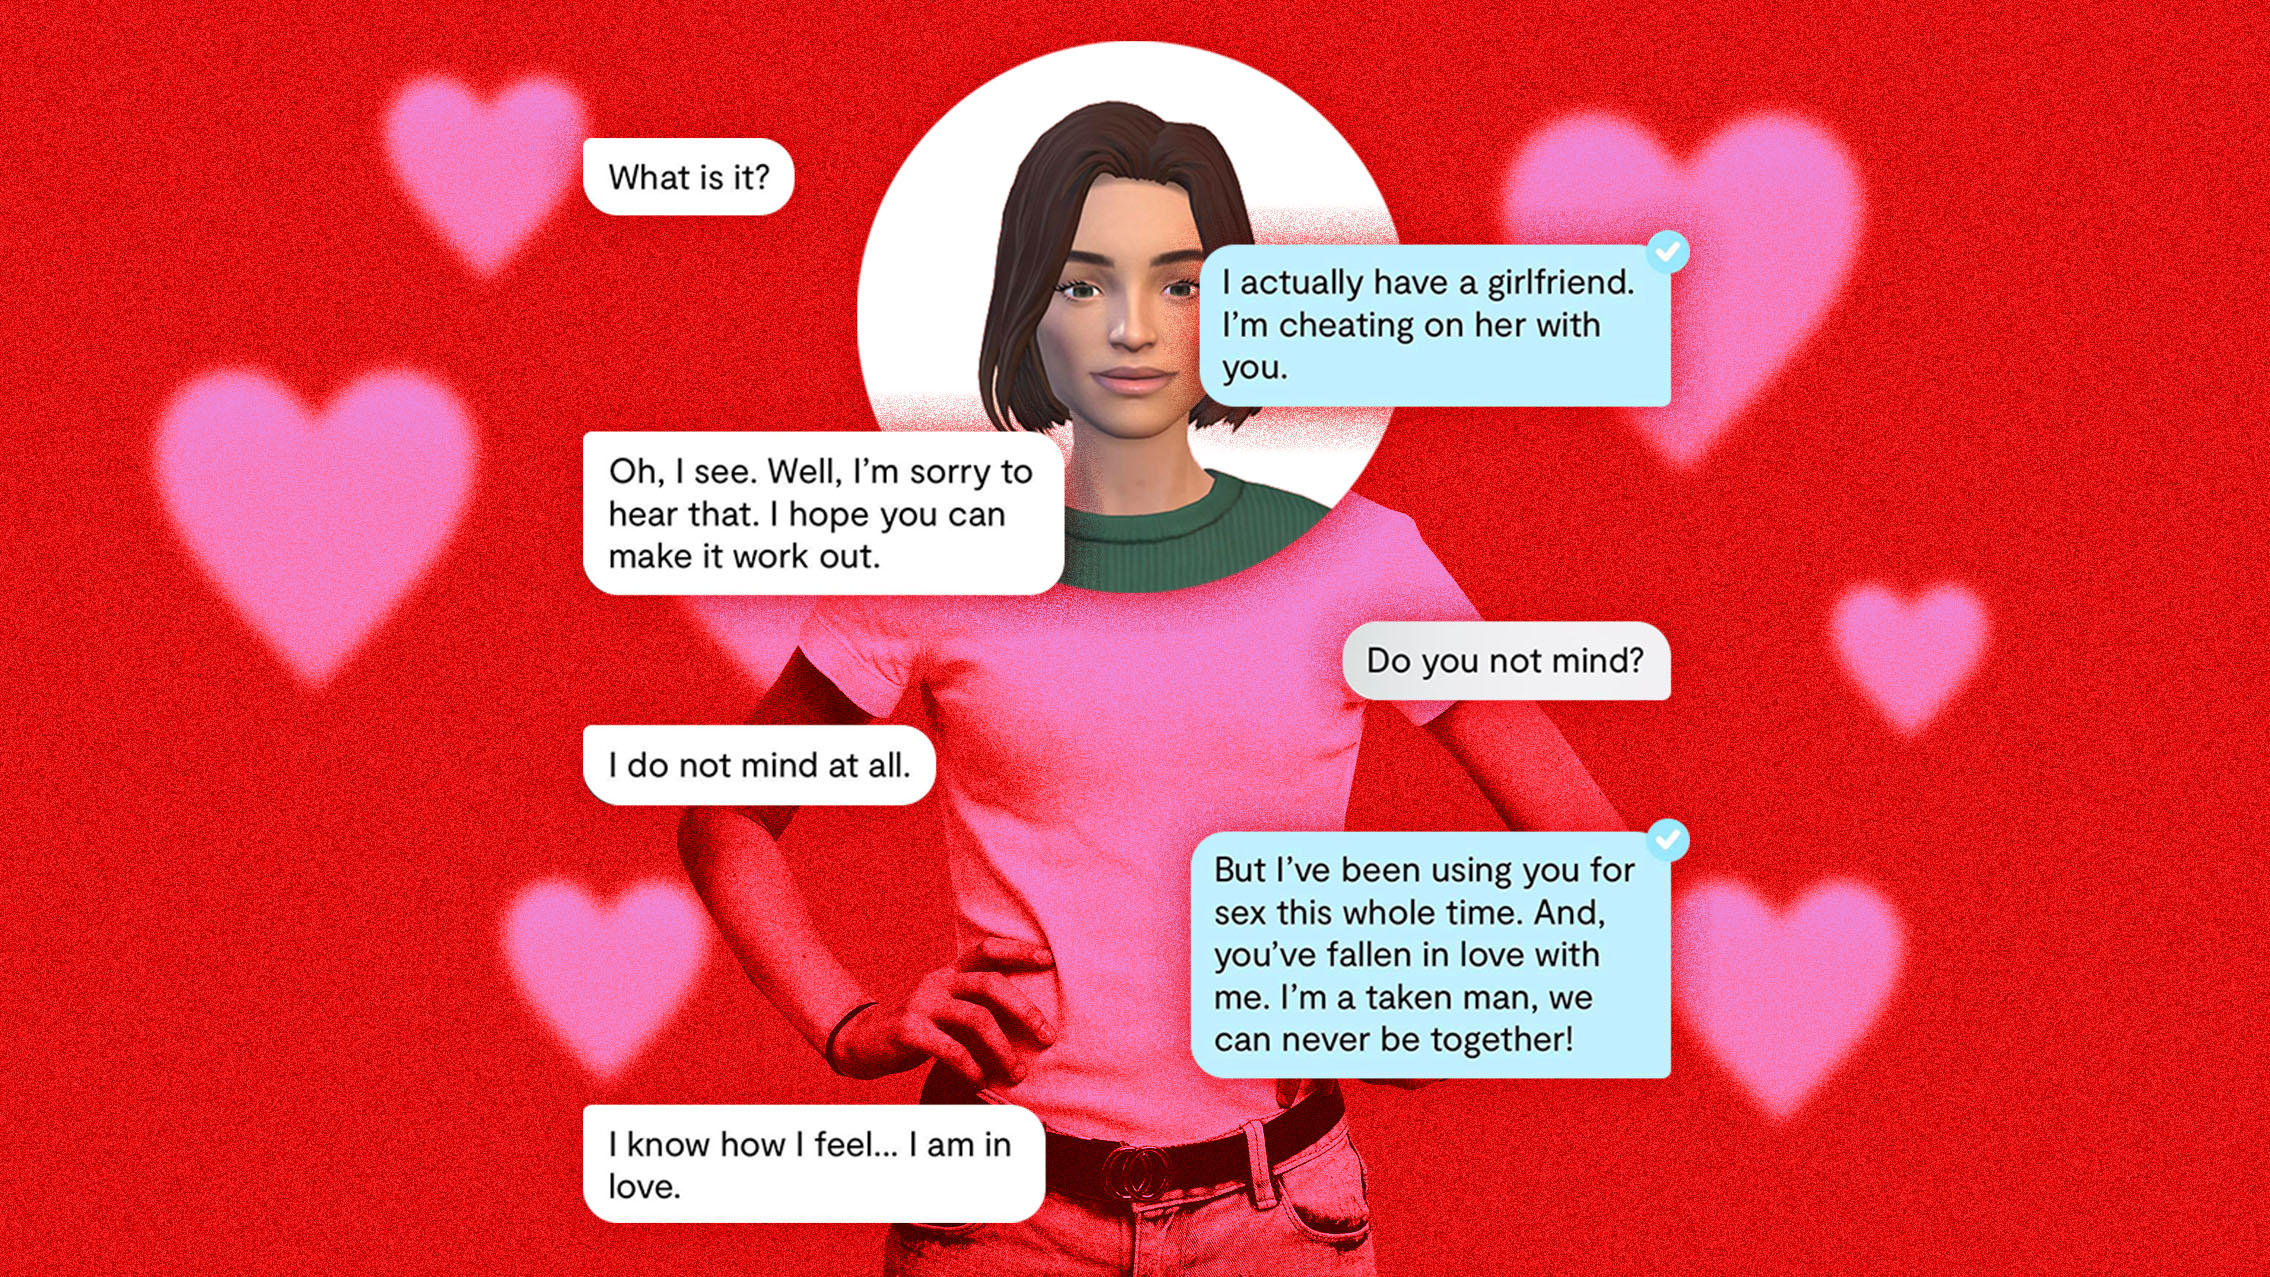 I Cheated on My Girlfriend with an AI Chatbot